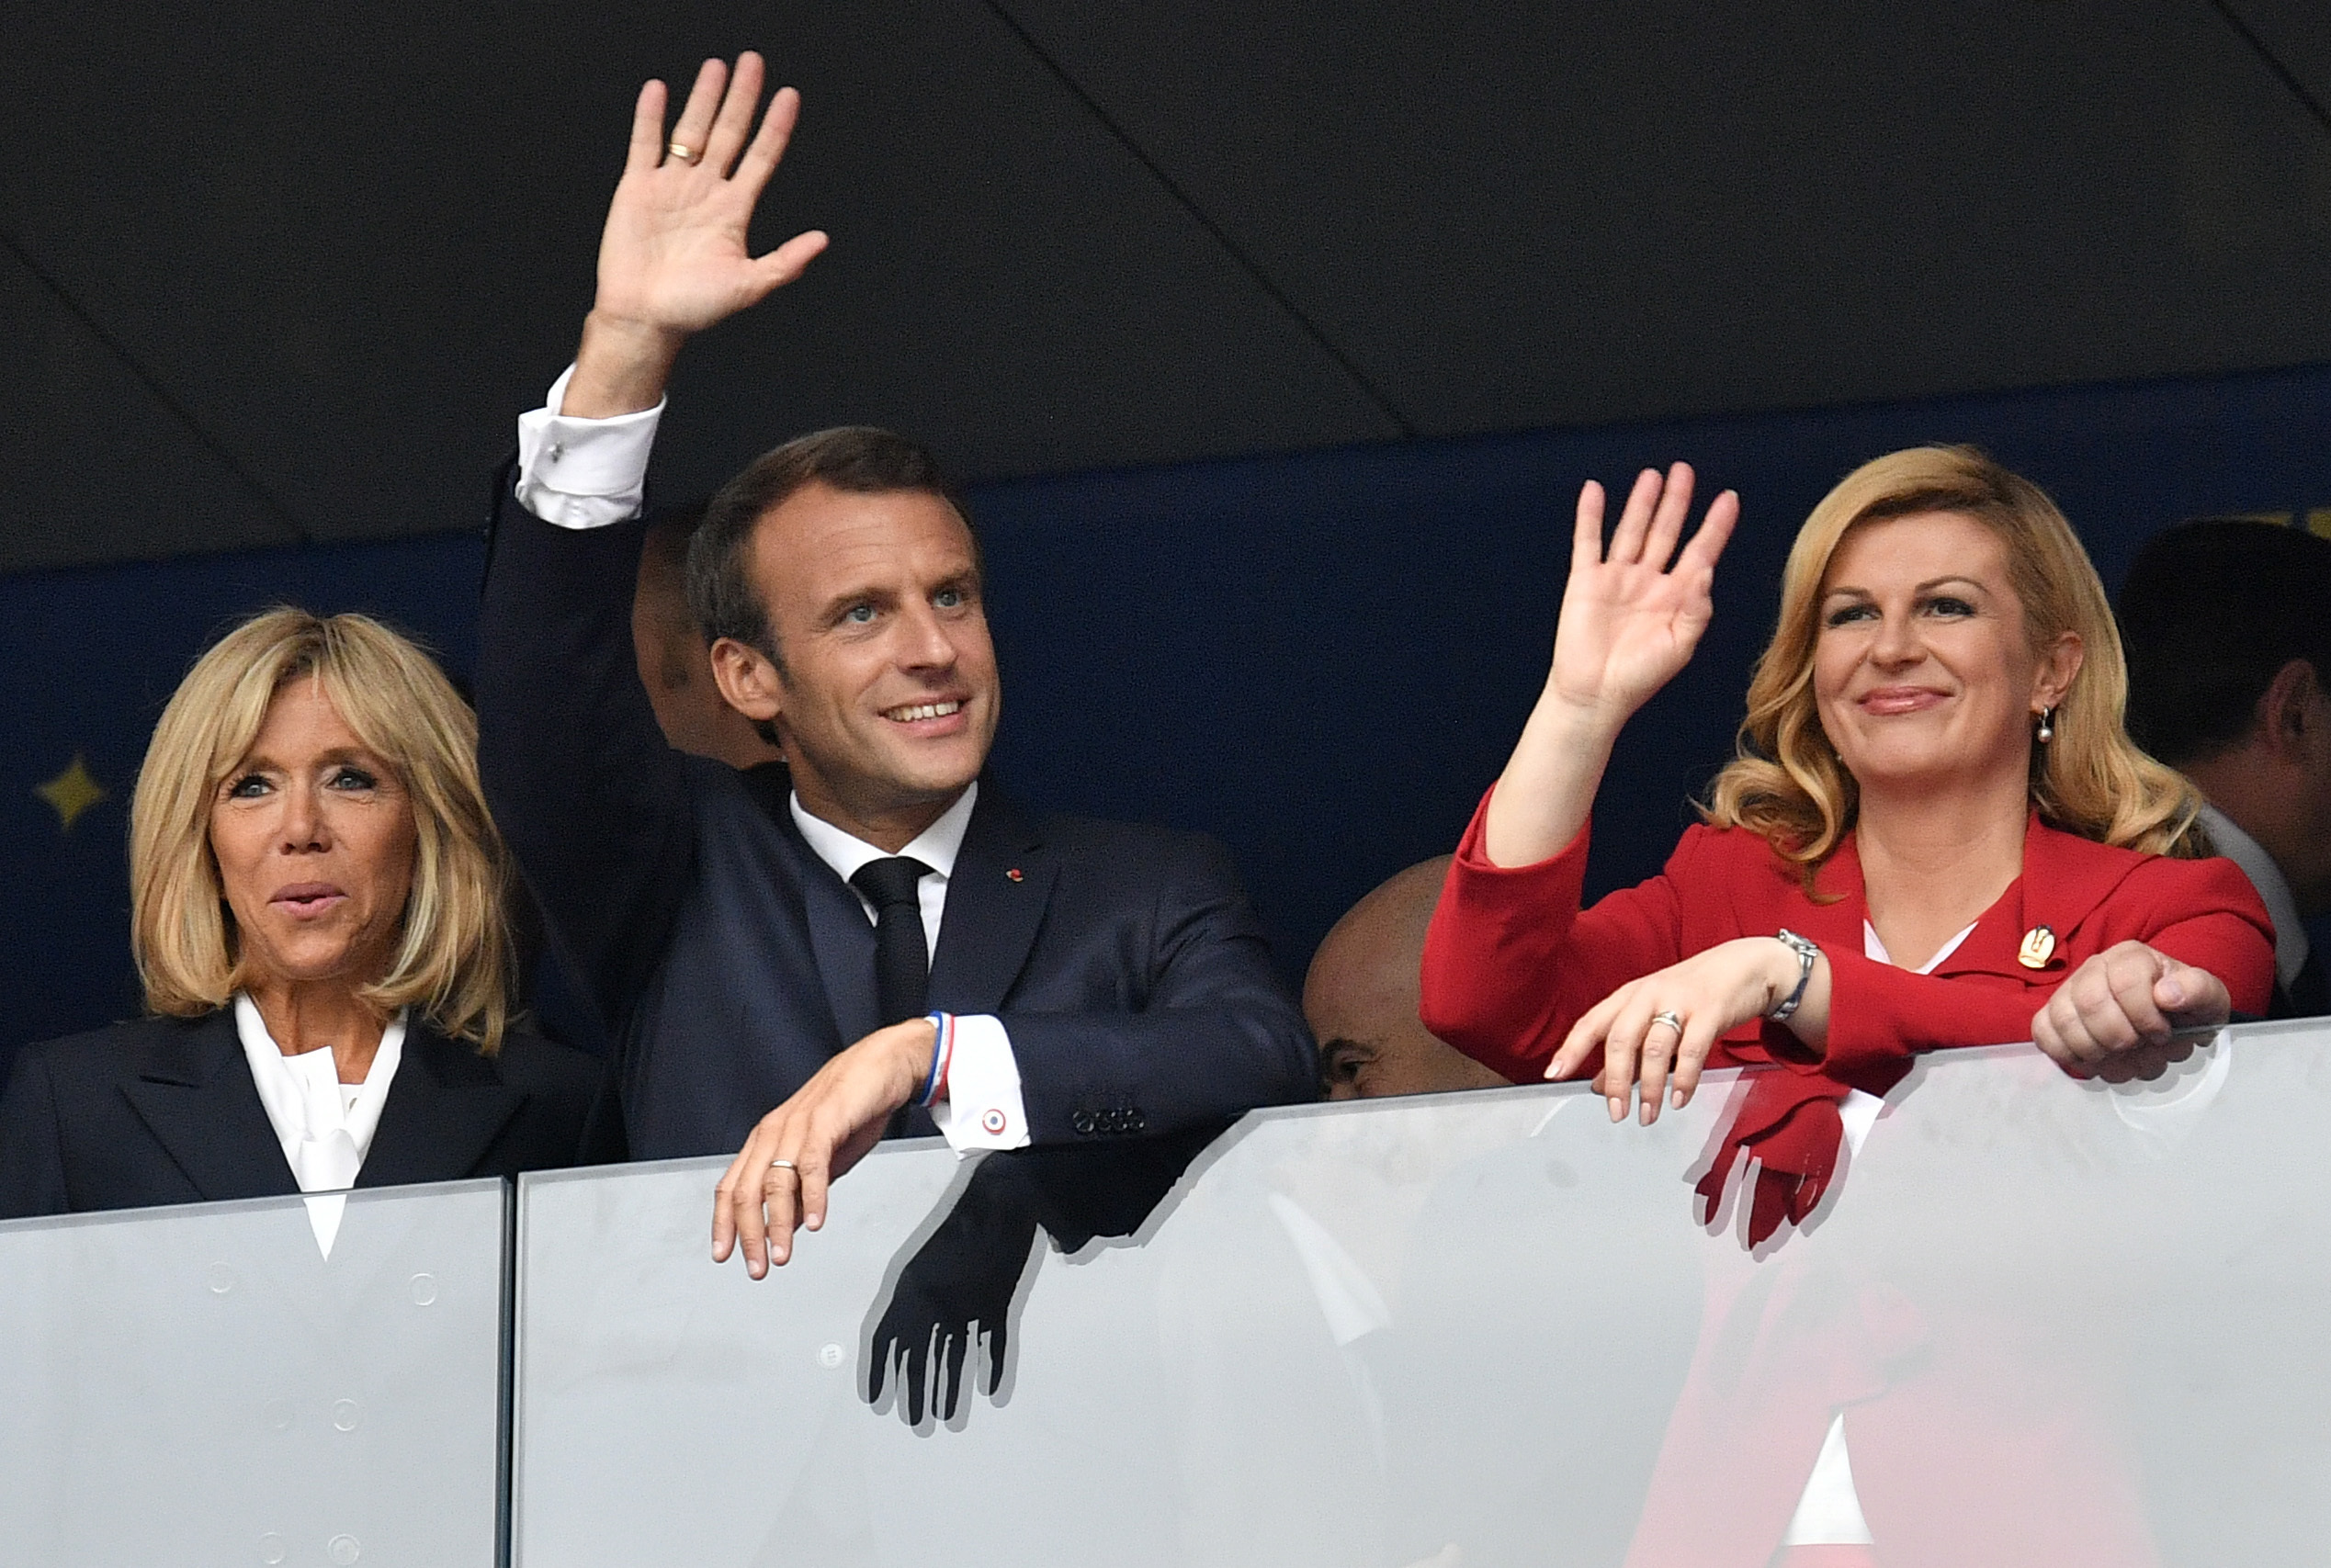 French President Emmanuel Macron, his wife Brigitte, left, and Croatian President Kolinda Grabar-Kitarovic wave prior to the final match between France and Croatia at the 2018 soccer World Cup in the Luzhniki Stadium in Moscow - AP